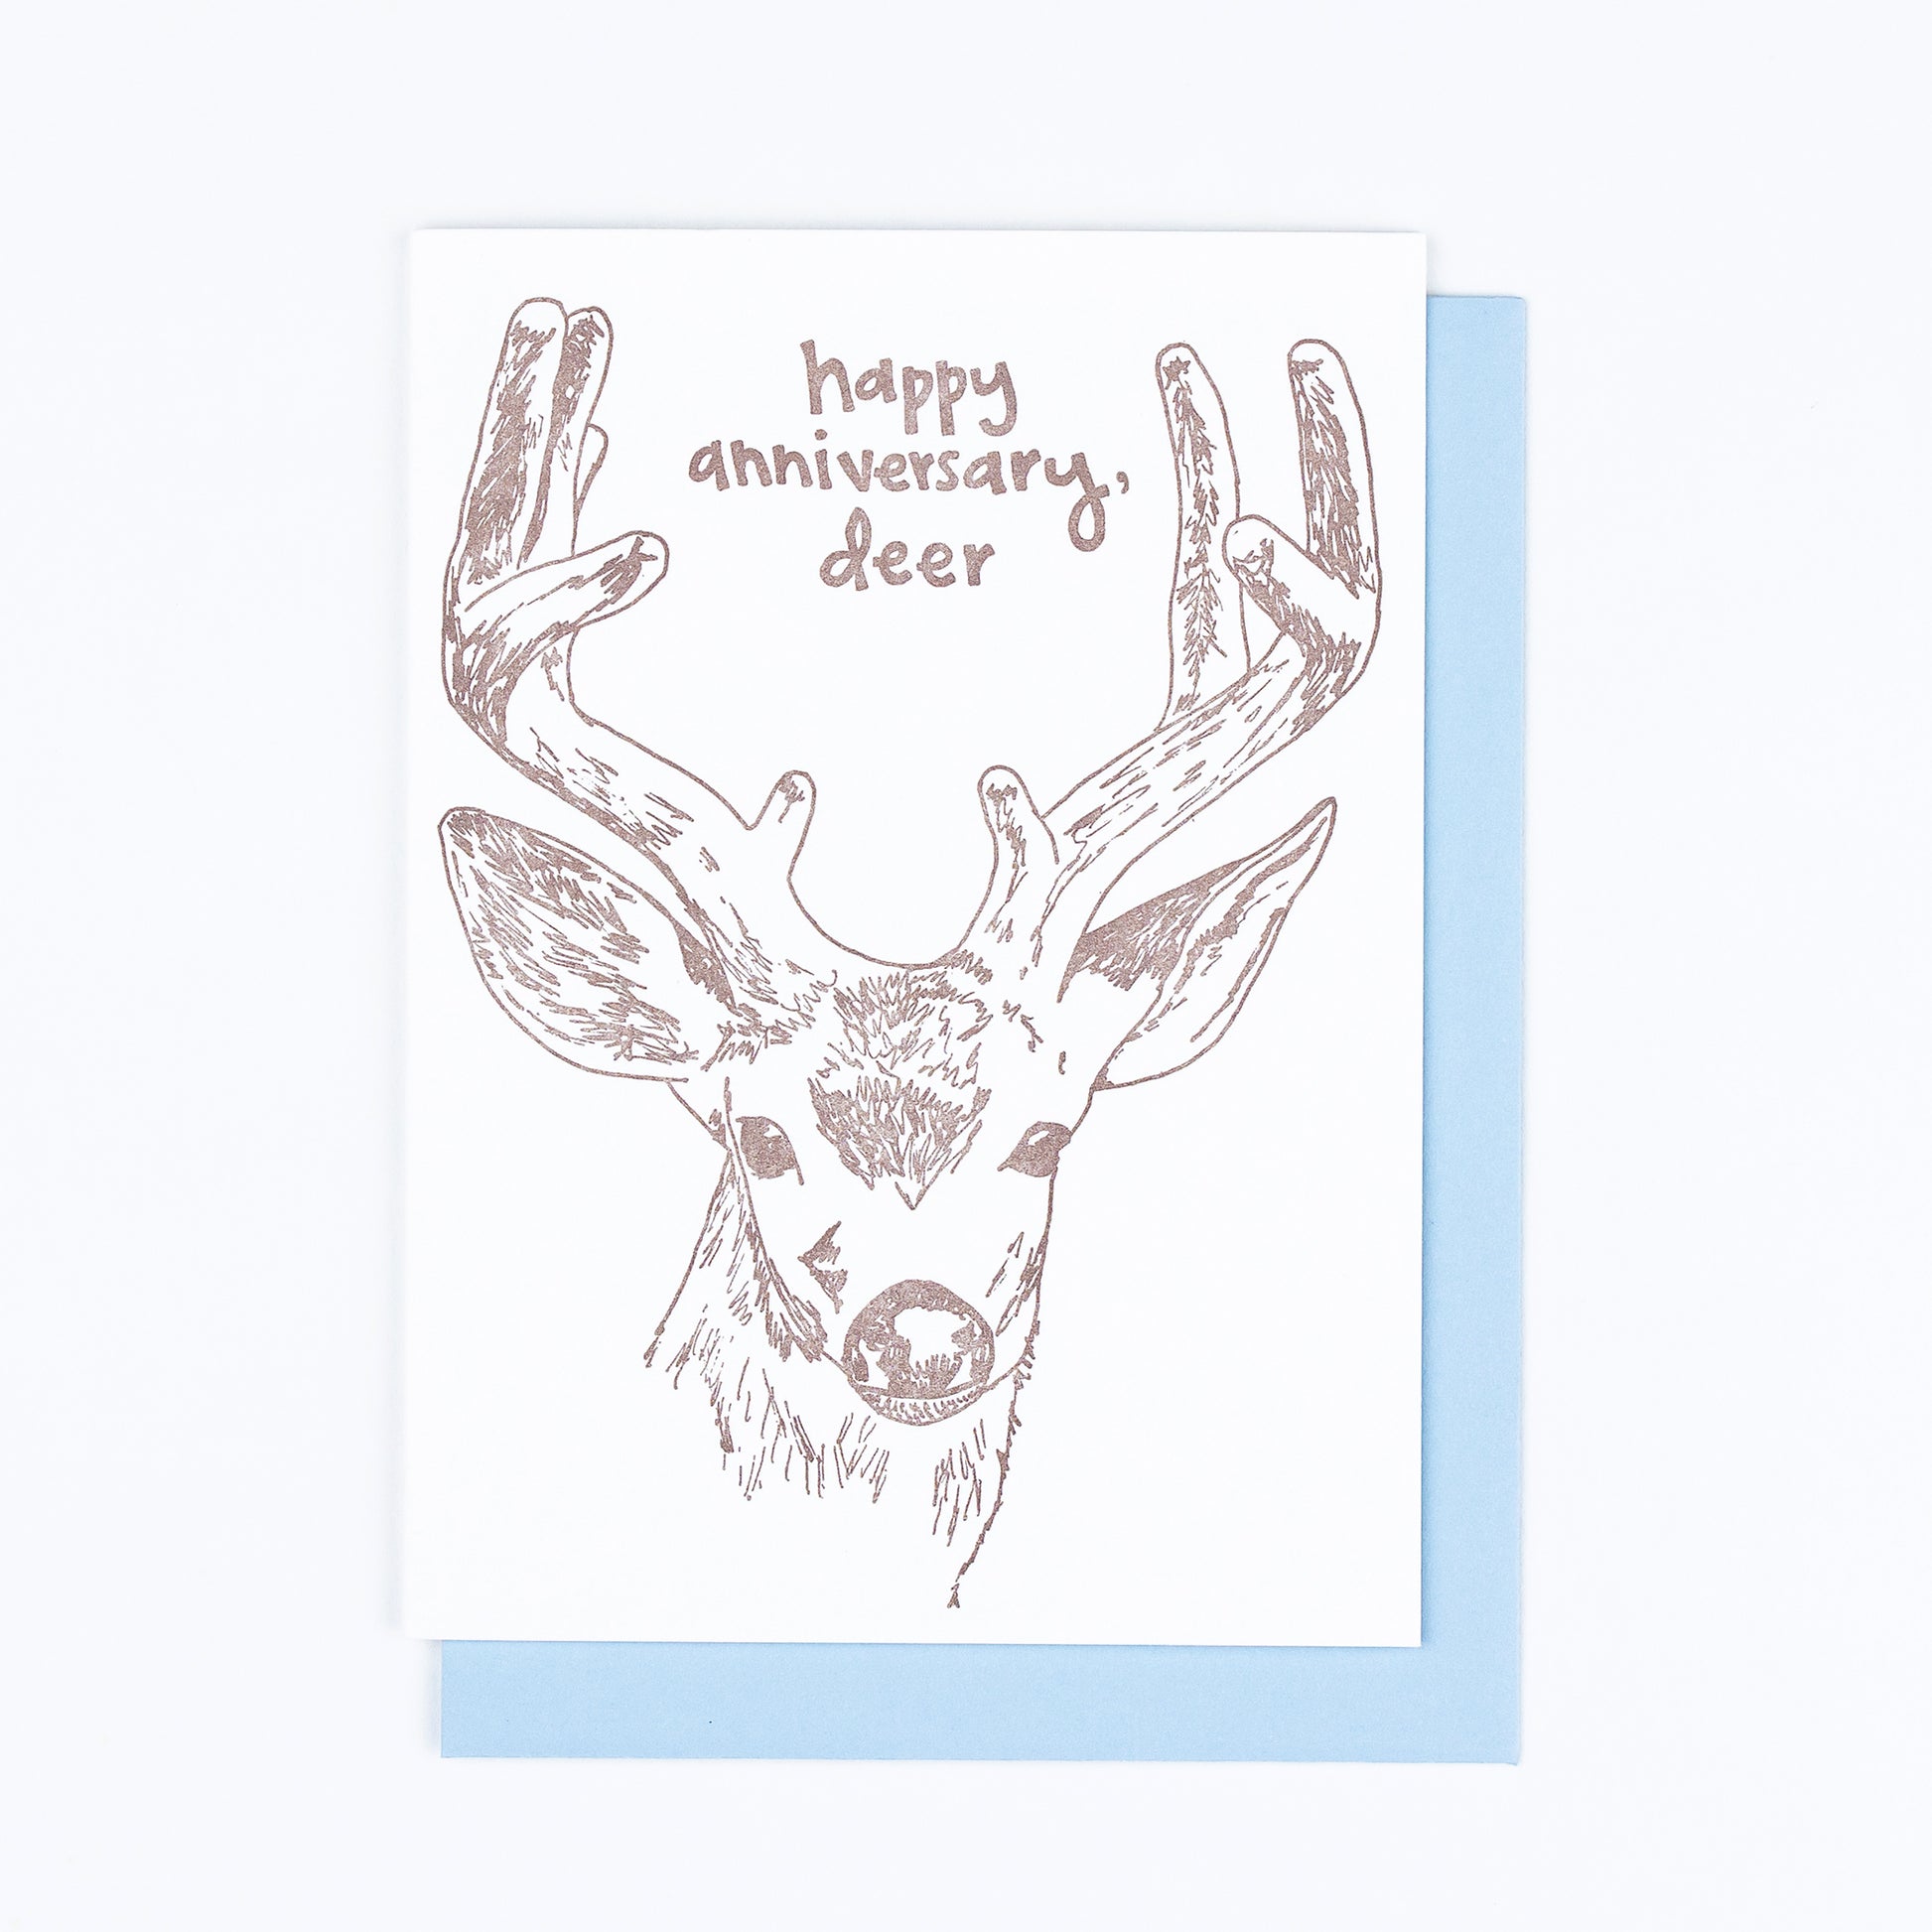 Letterpress greeting card featuring a hand-drawn buck, printed in an earthy brown ink. Whimsical hand-drawn text saying "Happy Annivesary, Deer" is shown inside the deer antlers, in the same brown ink. The card is white, blank inside, and is paired with a light blue envelope.